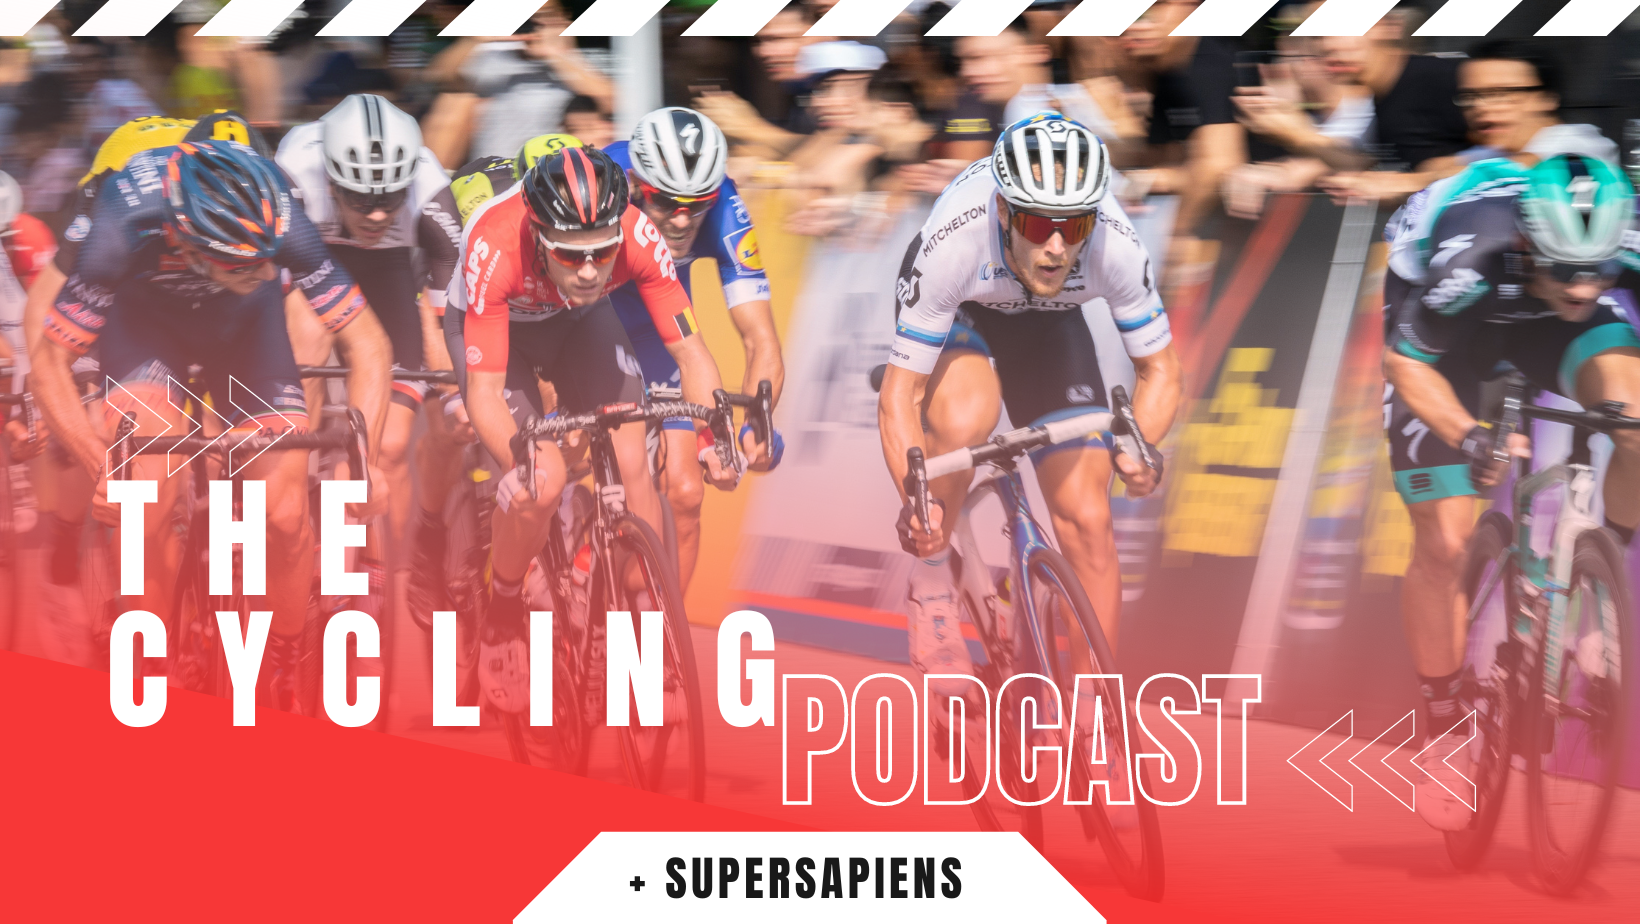 The Cycling Podcast Review